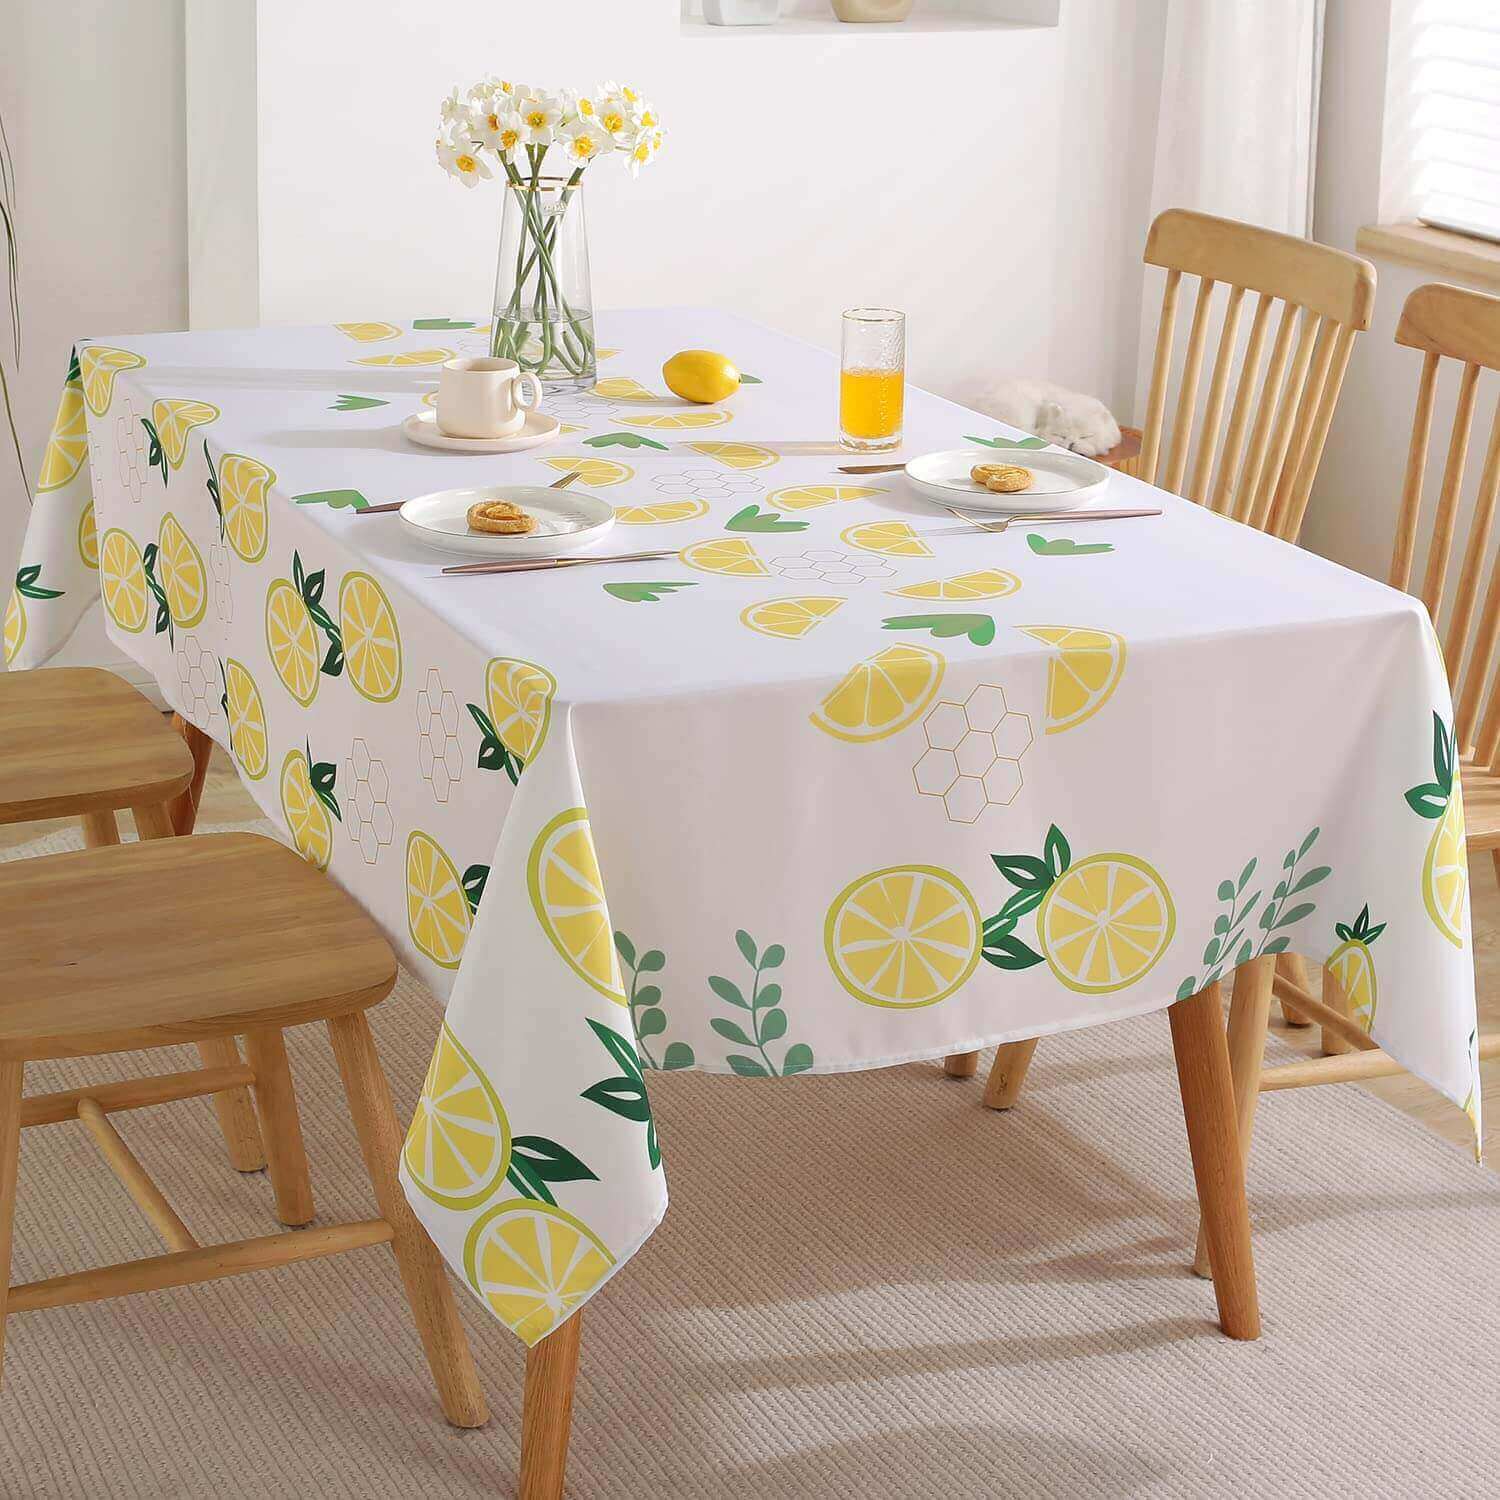 SASTYBALE Summer Table Cloth with Lemons Pattern